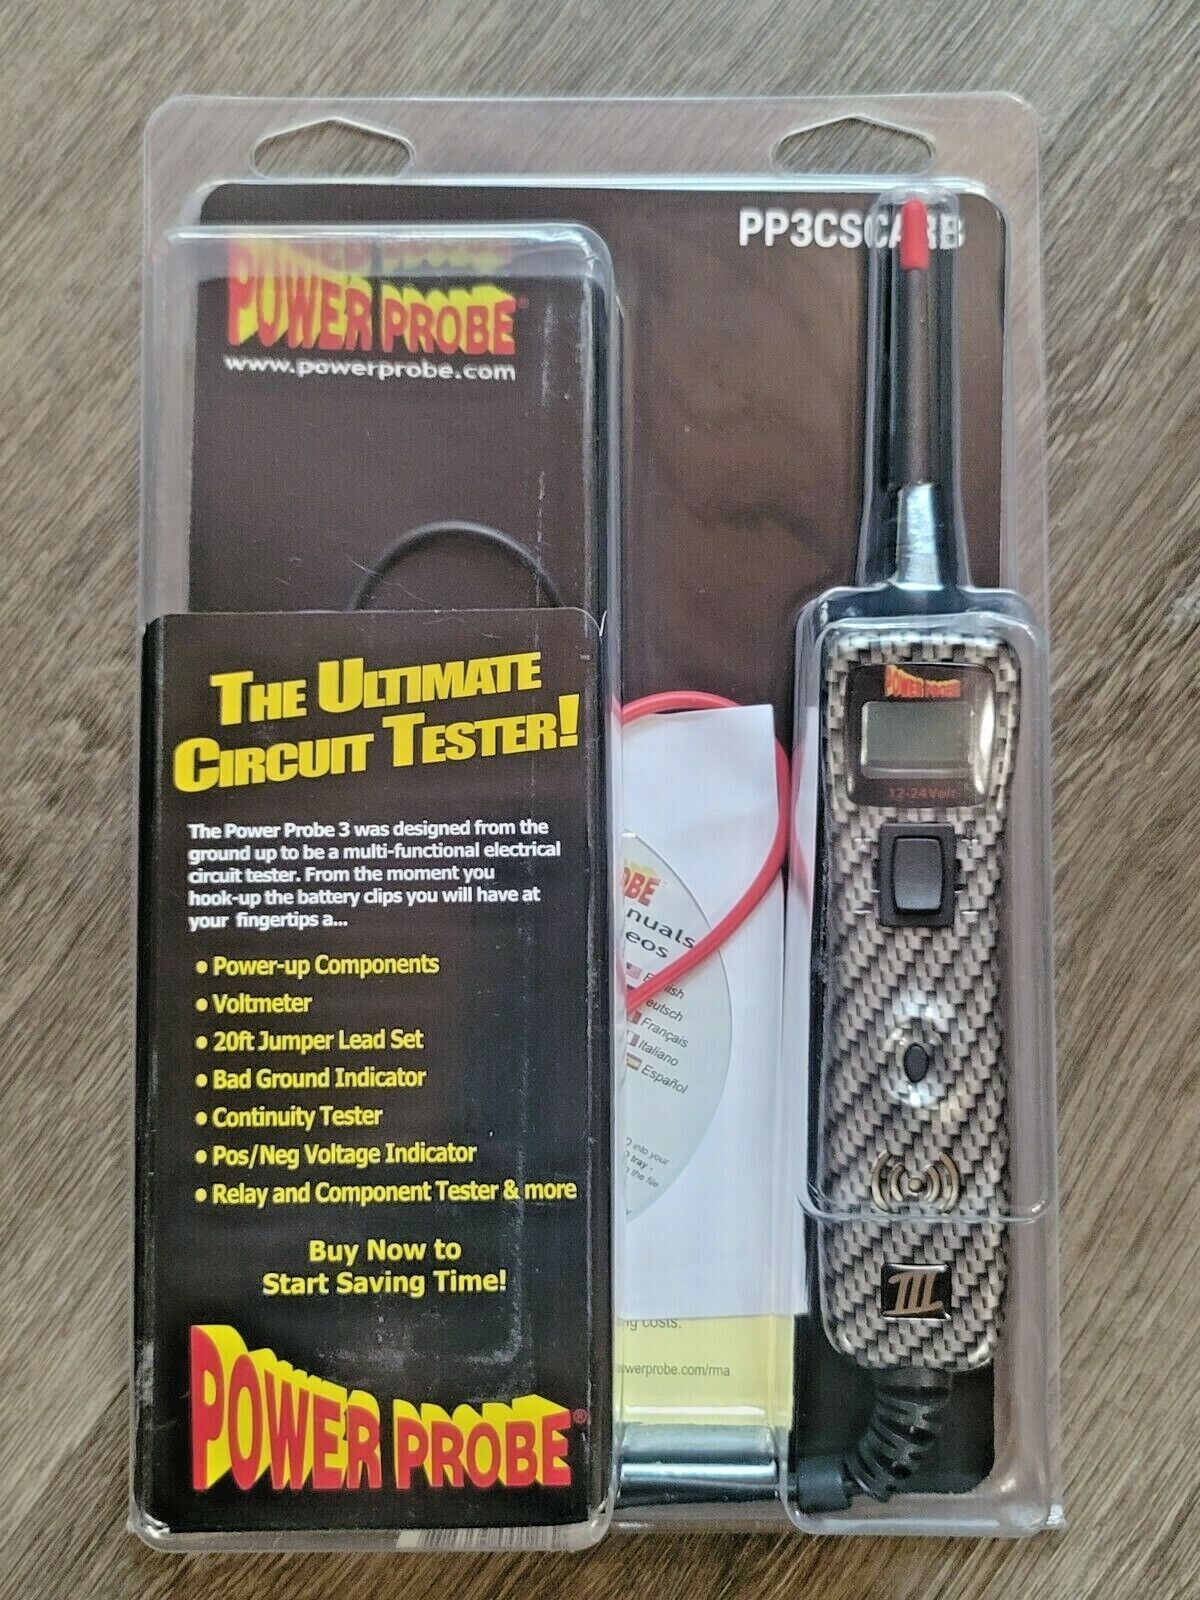 Power Probe III Circuit Tester & Voltmeter Kit Clamshell Carbon Fiber #PP3CSCARB